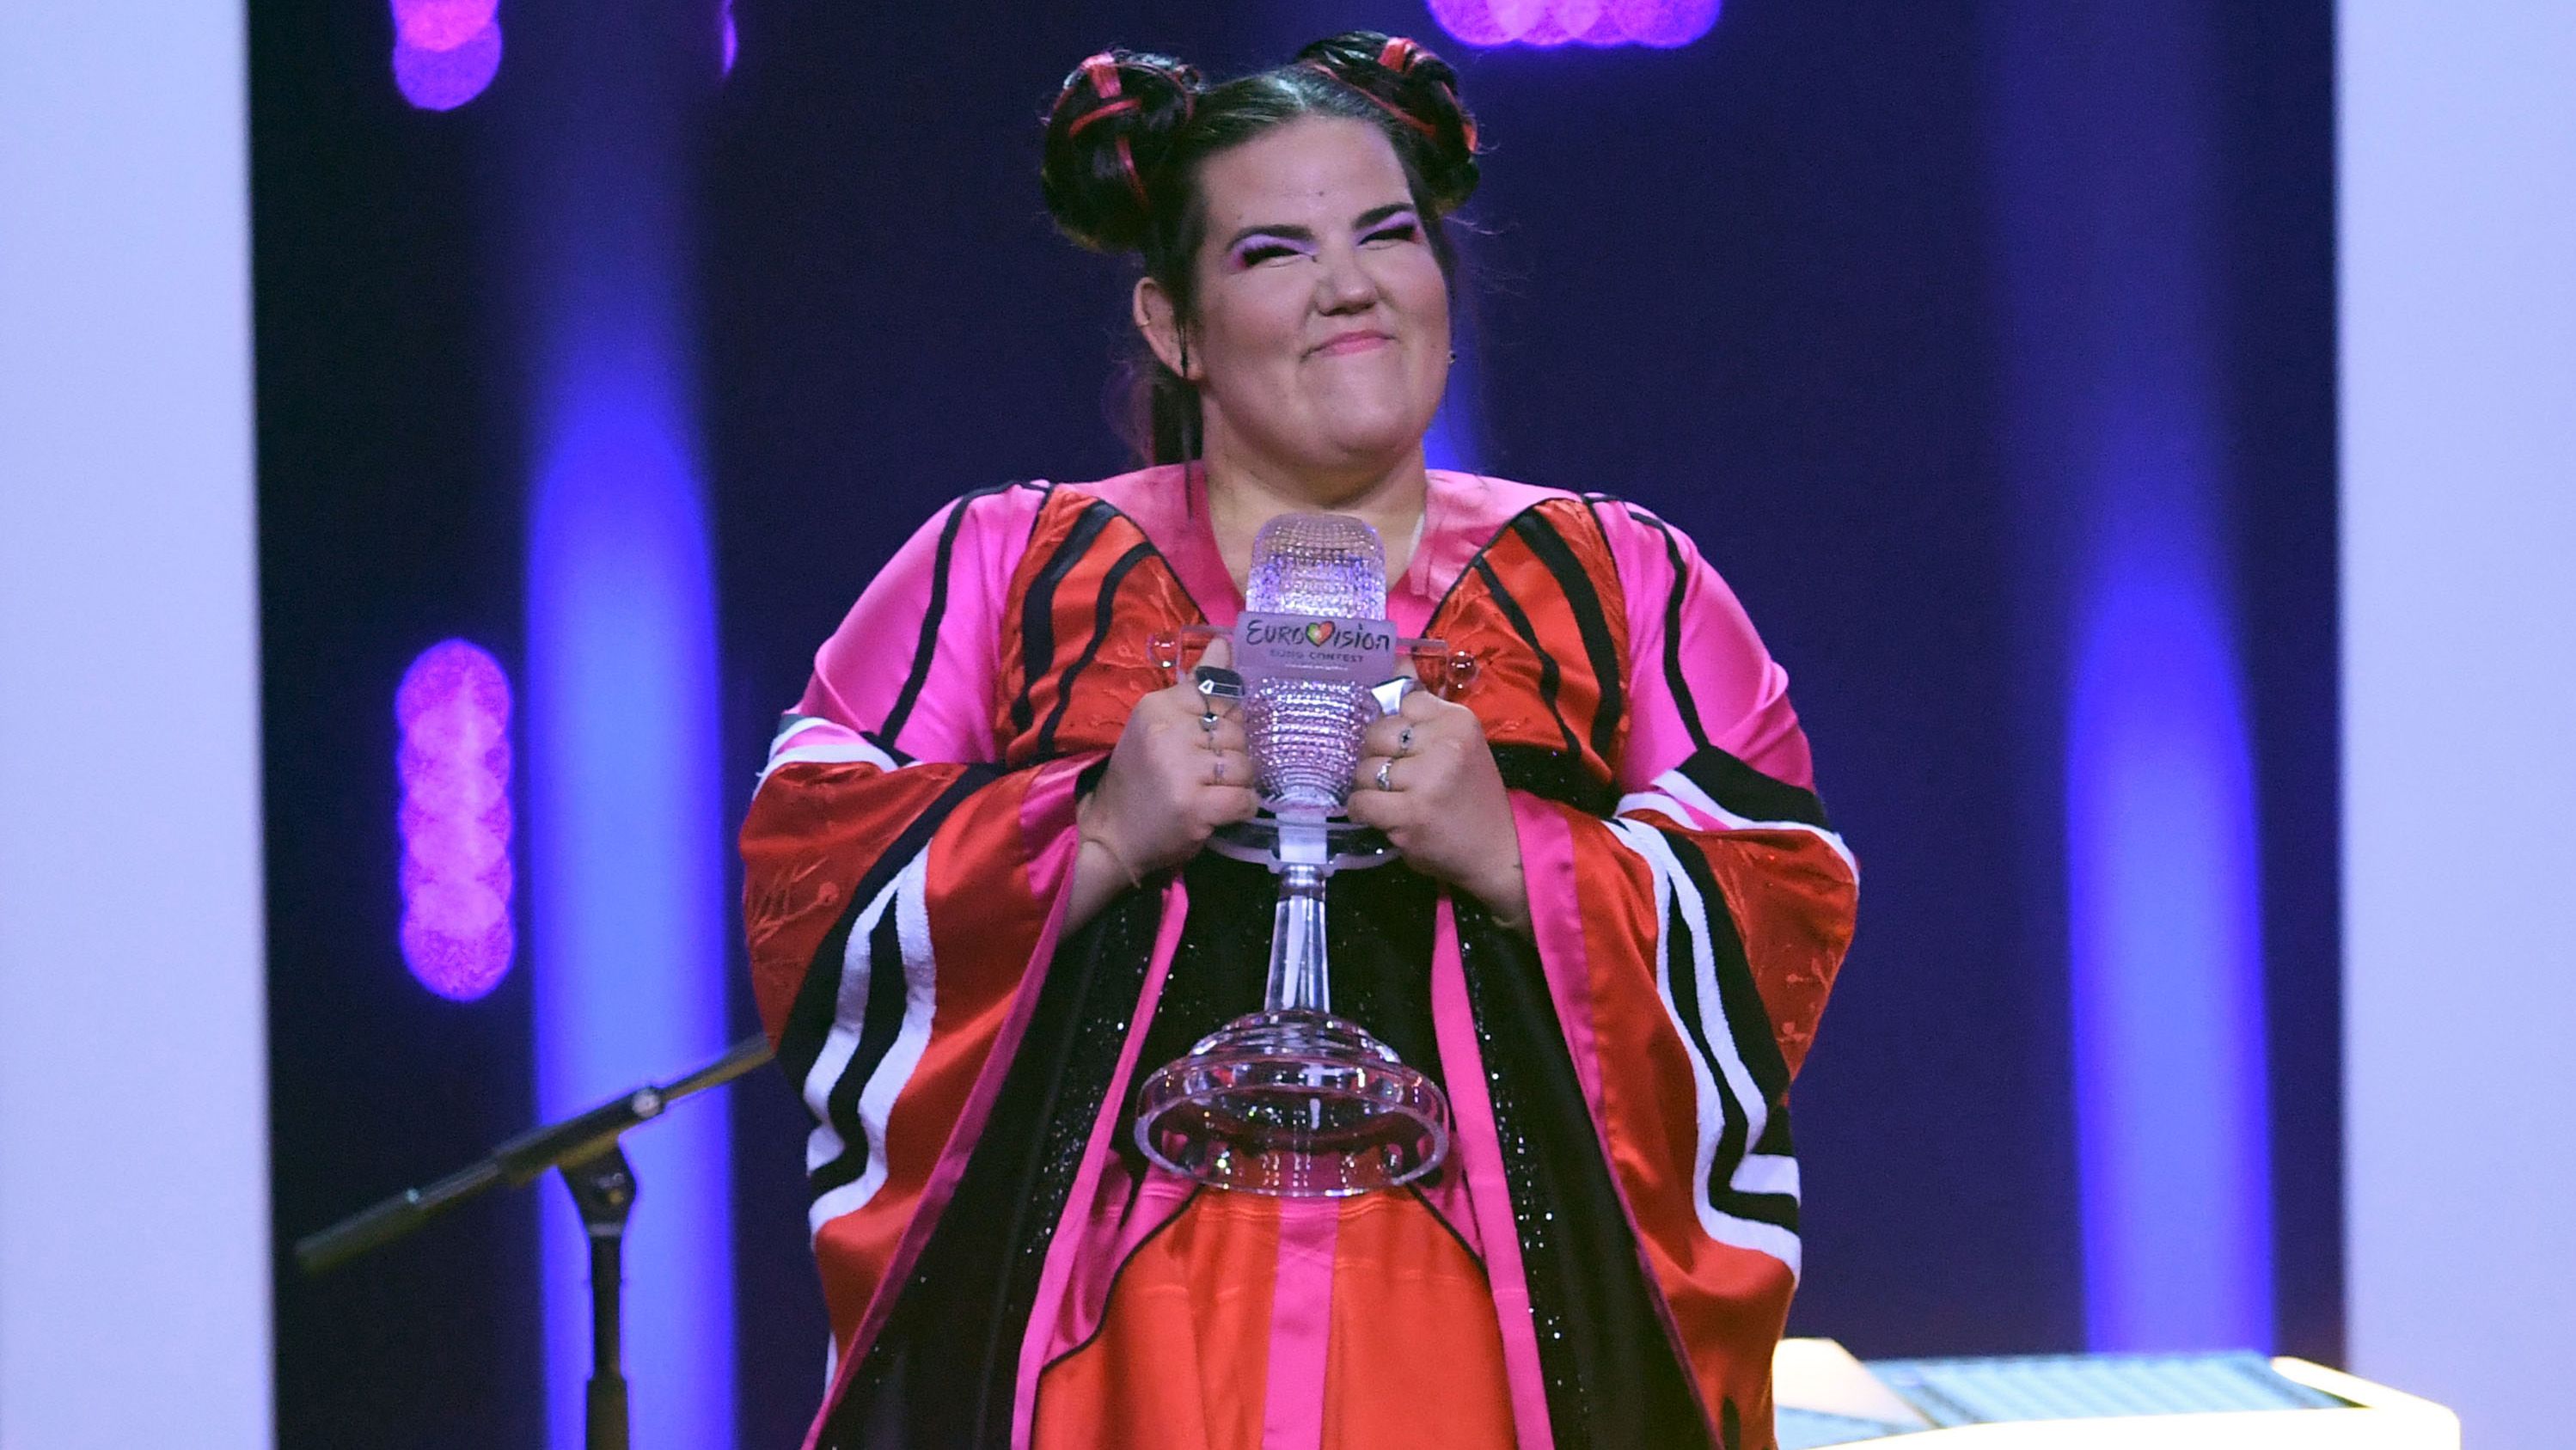 Israel's singer Netta celebrates winning the 63rd Eurovision Song Contest in 2018.